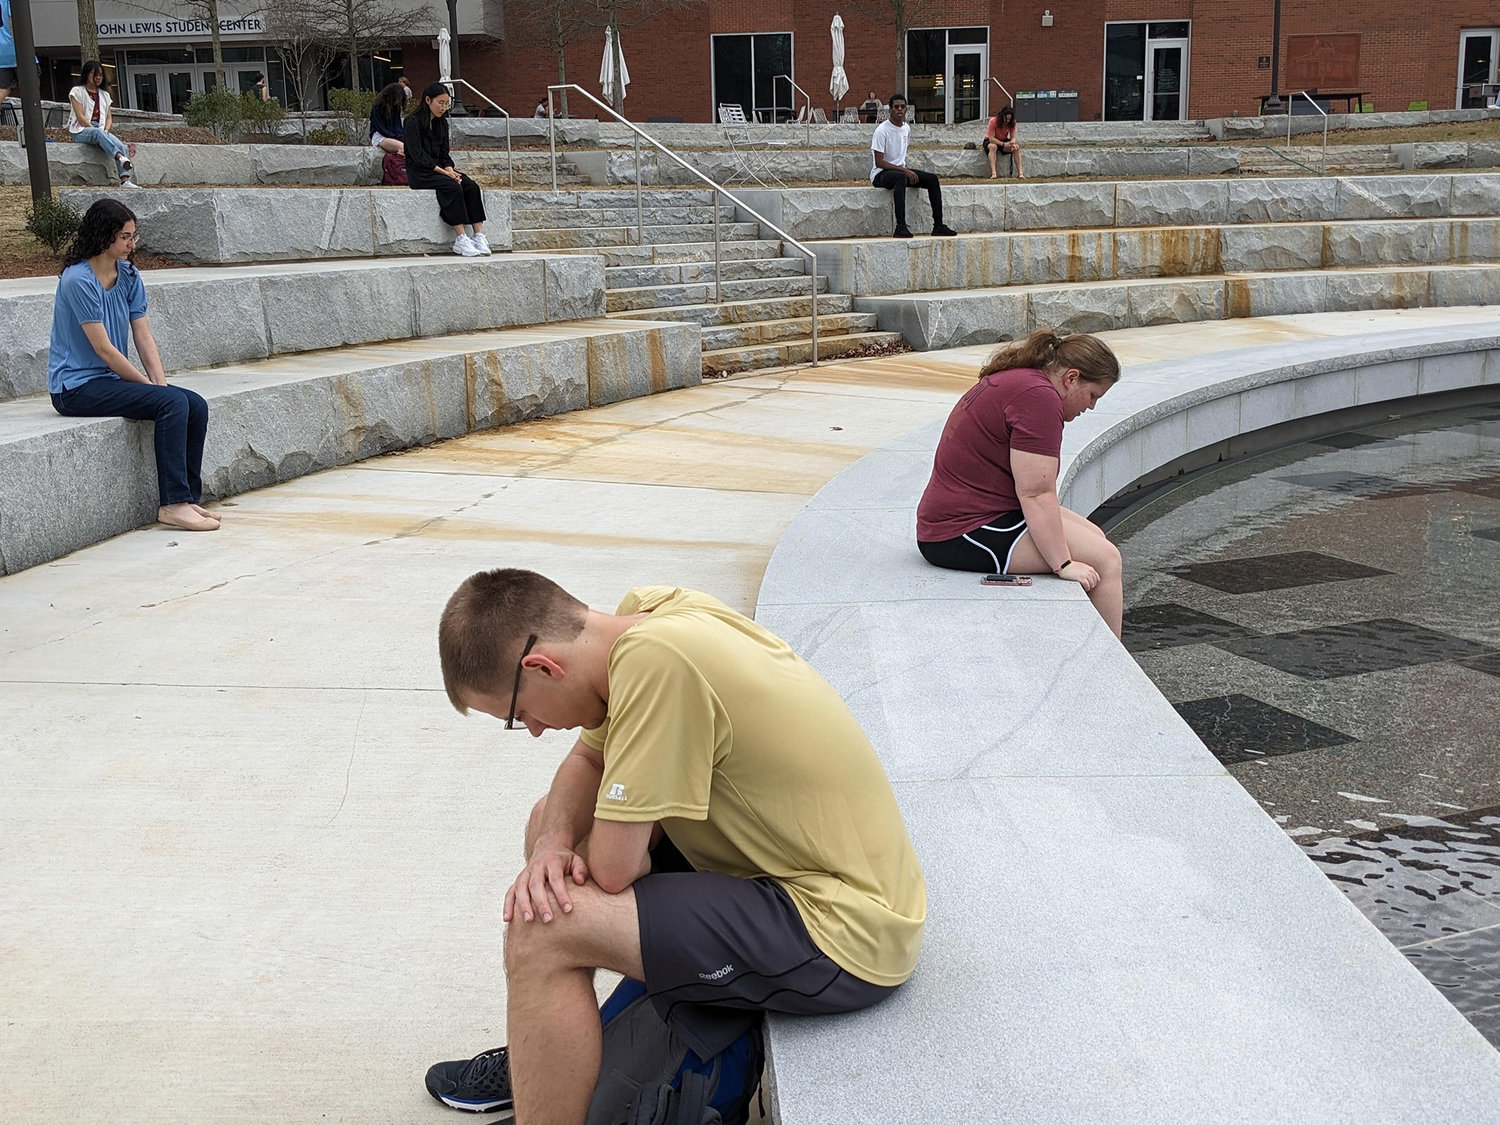 Students pray outside the student center during a Collegiate Day of Prayer event at Georgia Tech, Thursday, Feb. 23, 2023.